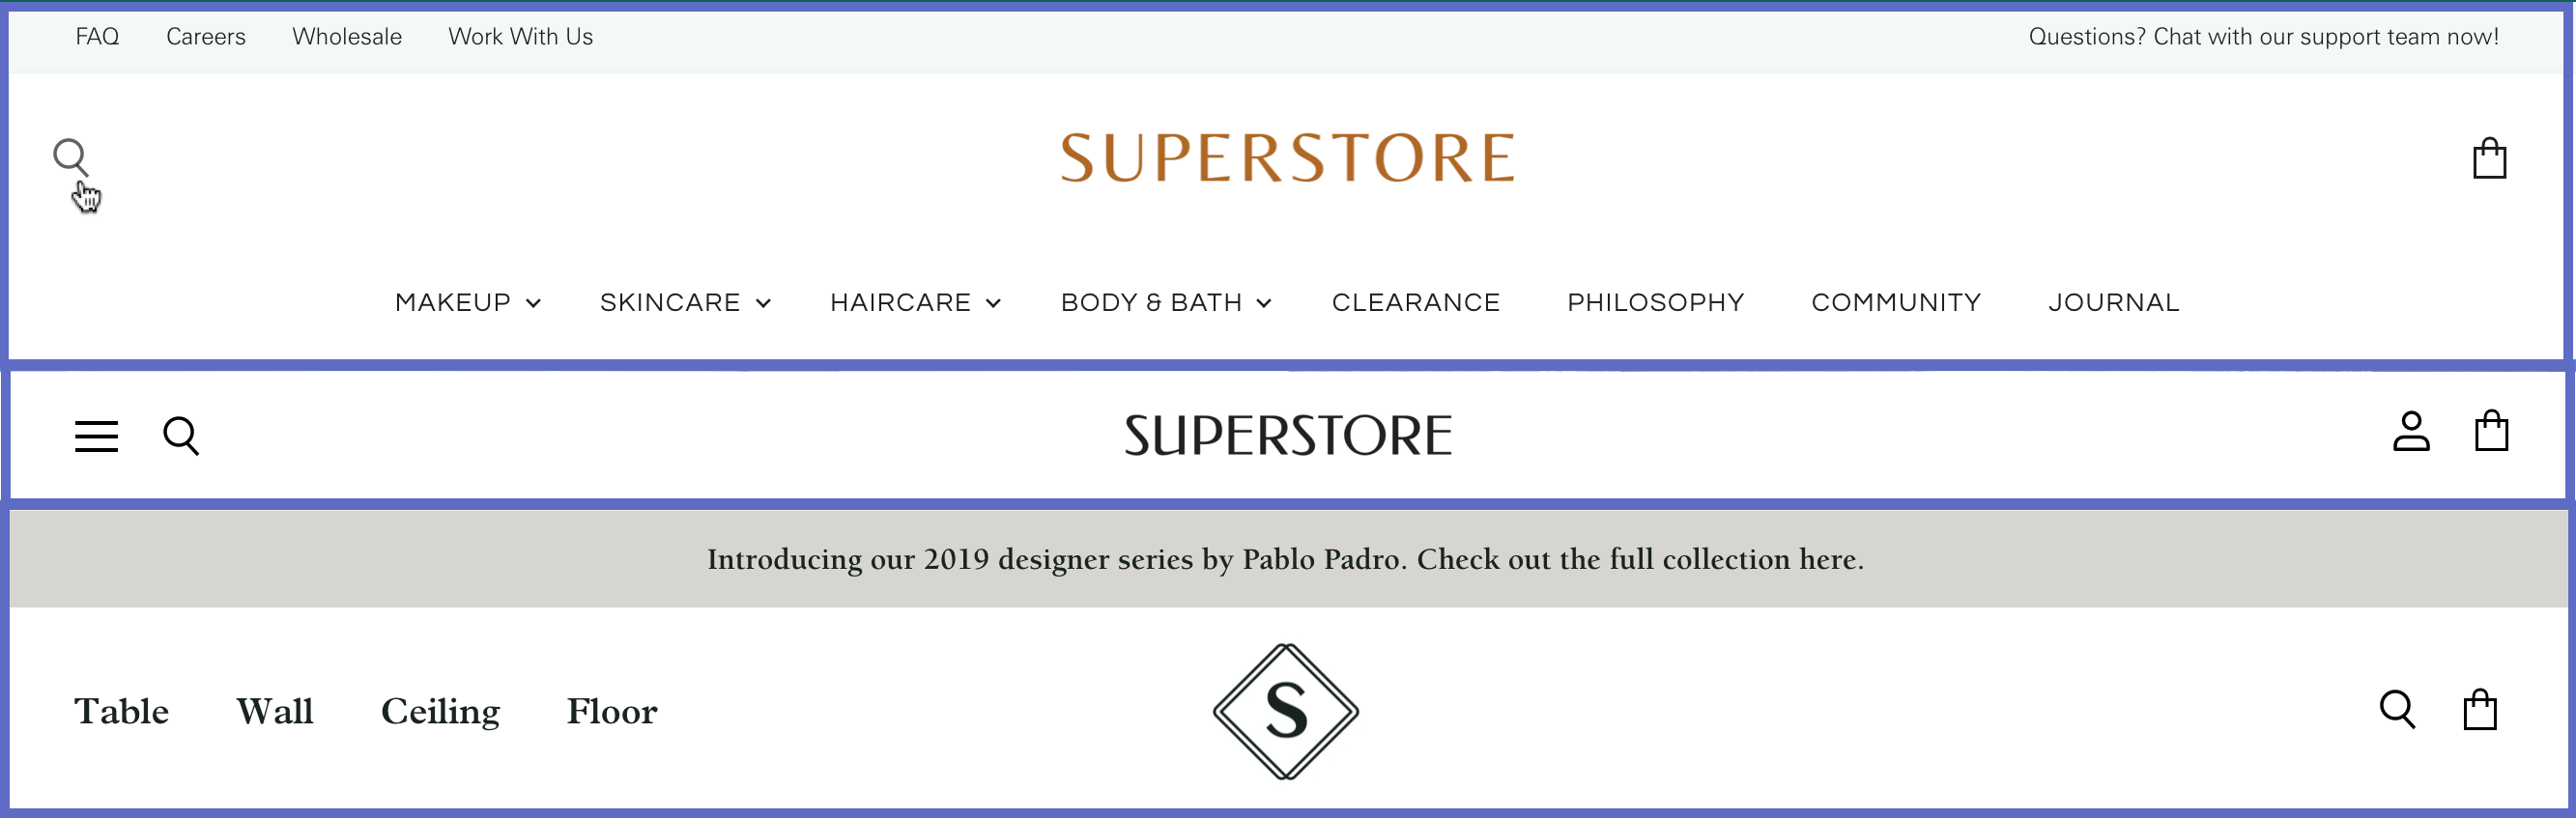 superstore_has_three_layout_options_for_the_header.png